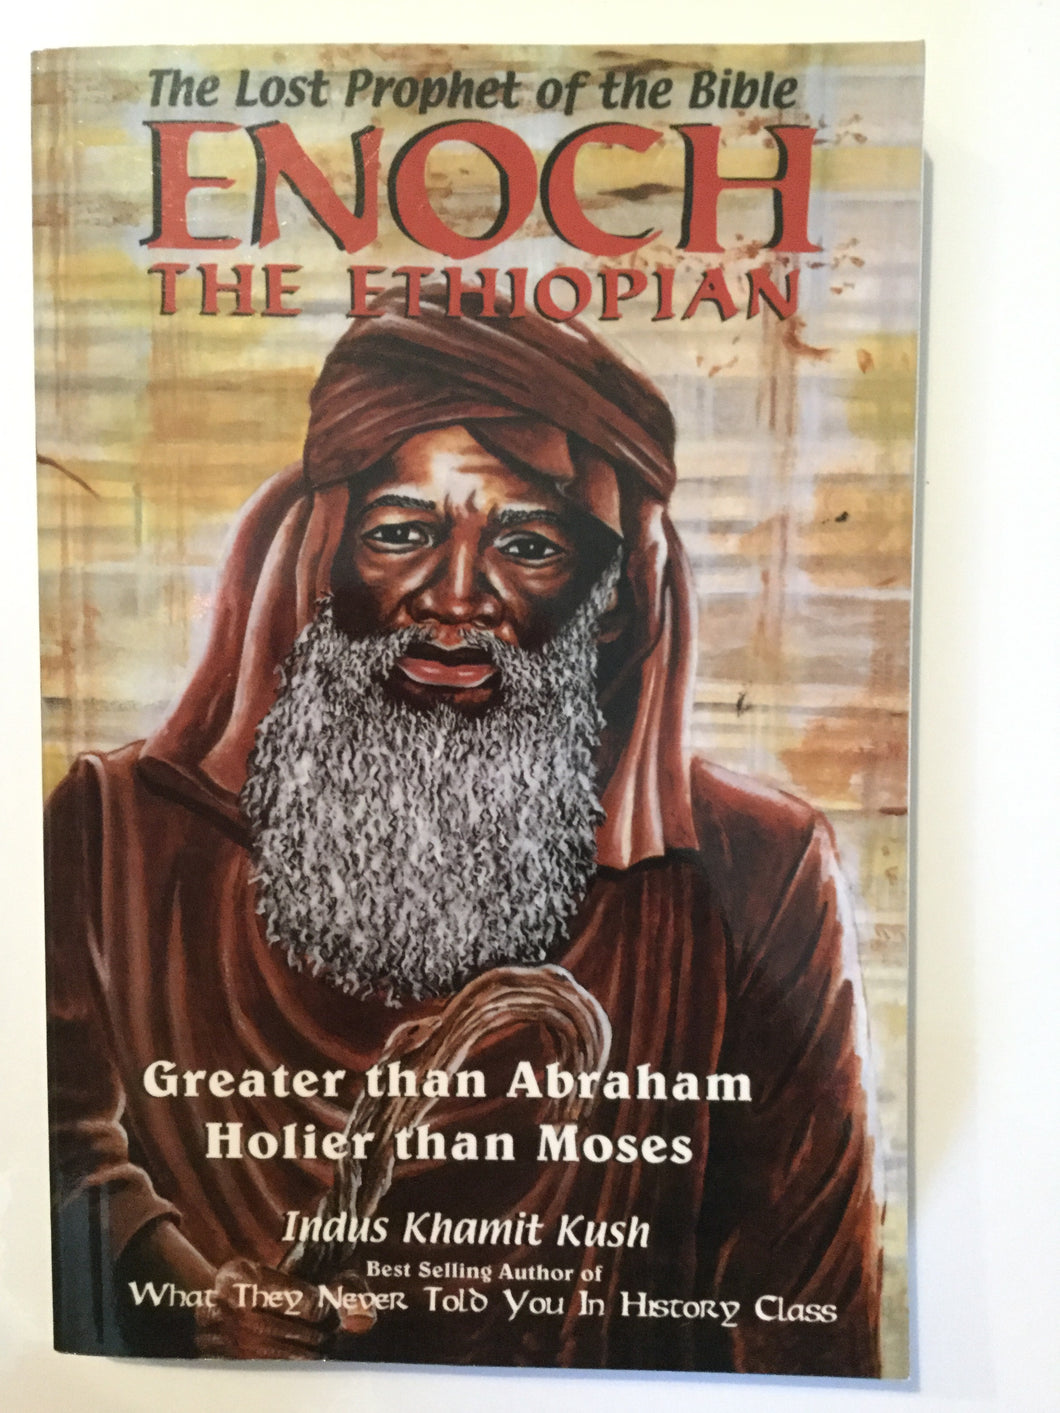 Enoch the Ethiopian, The lost prophet of the Bible by Indus Khamit Kush